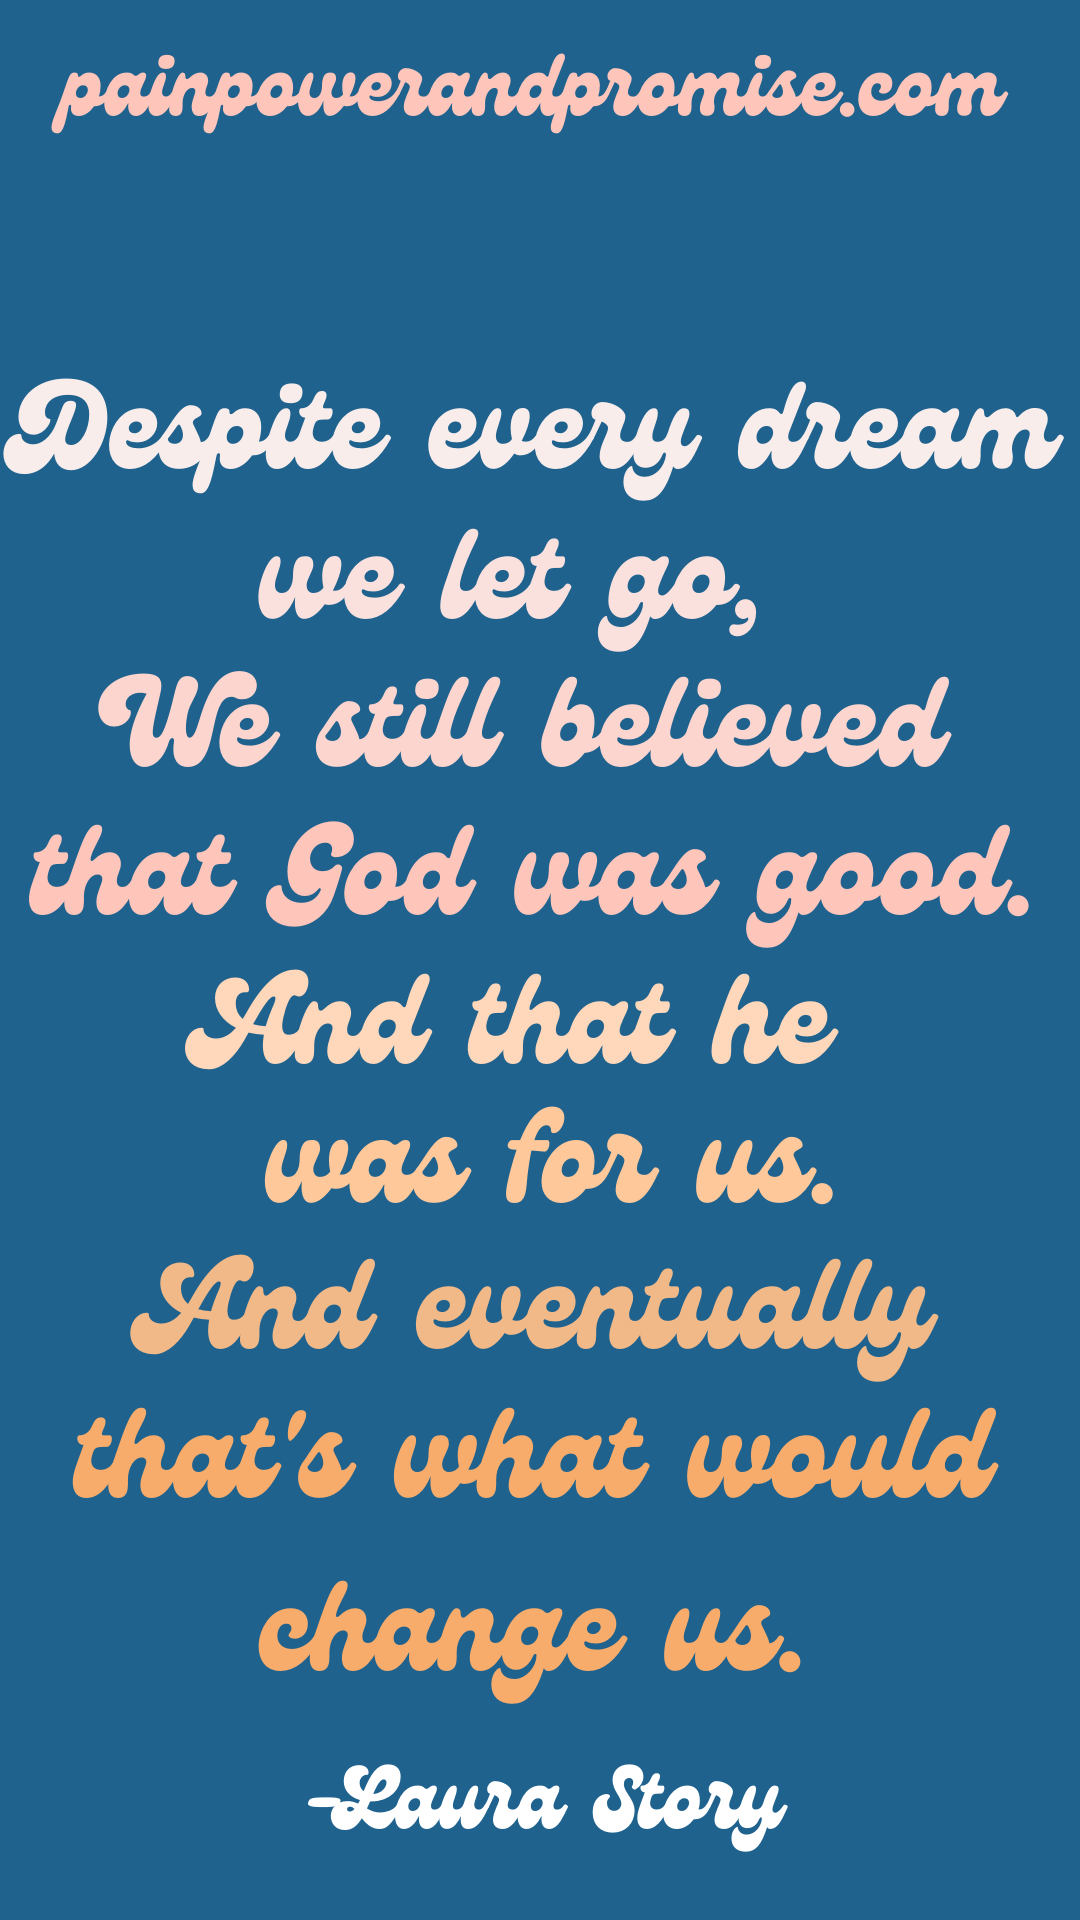 Inspirational Quote: Despite every dream we let go, we still believed that God was Good. And that he was for us. And eventually that's what would change us.